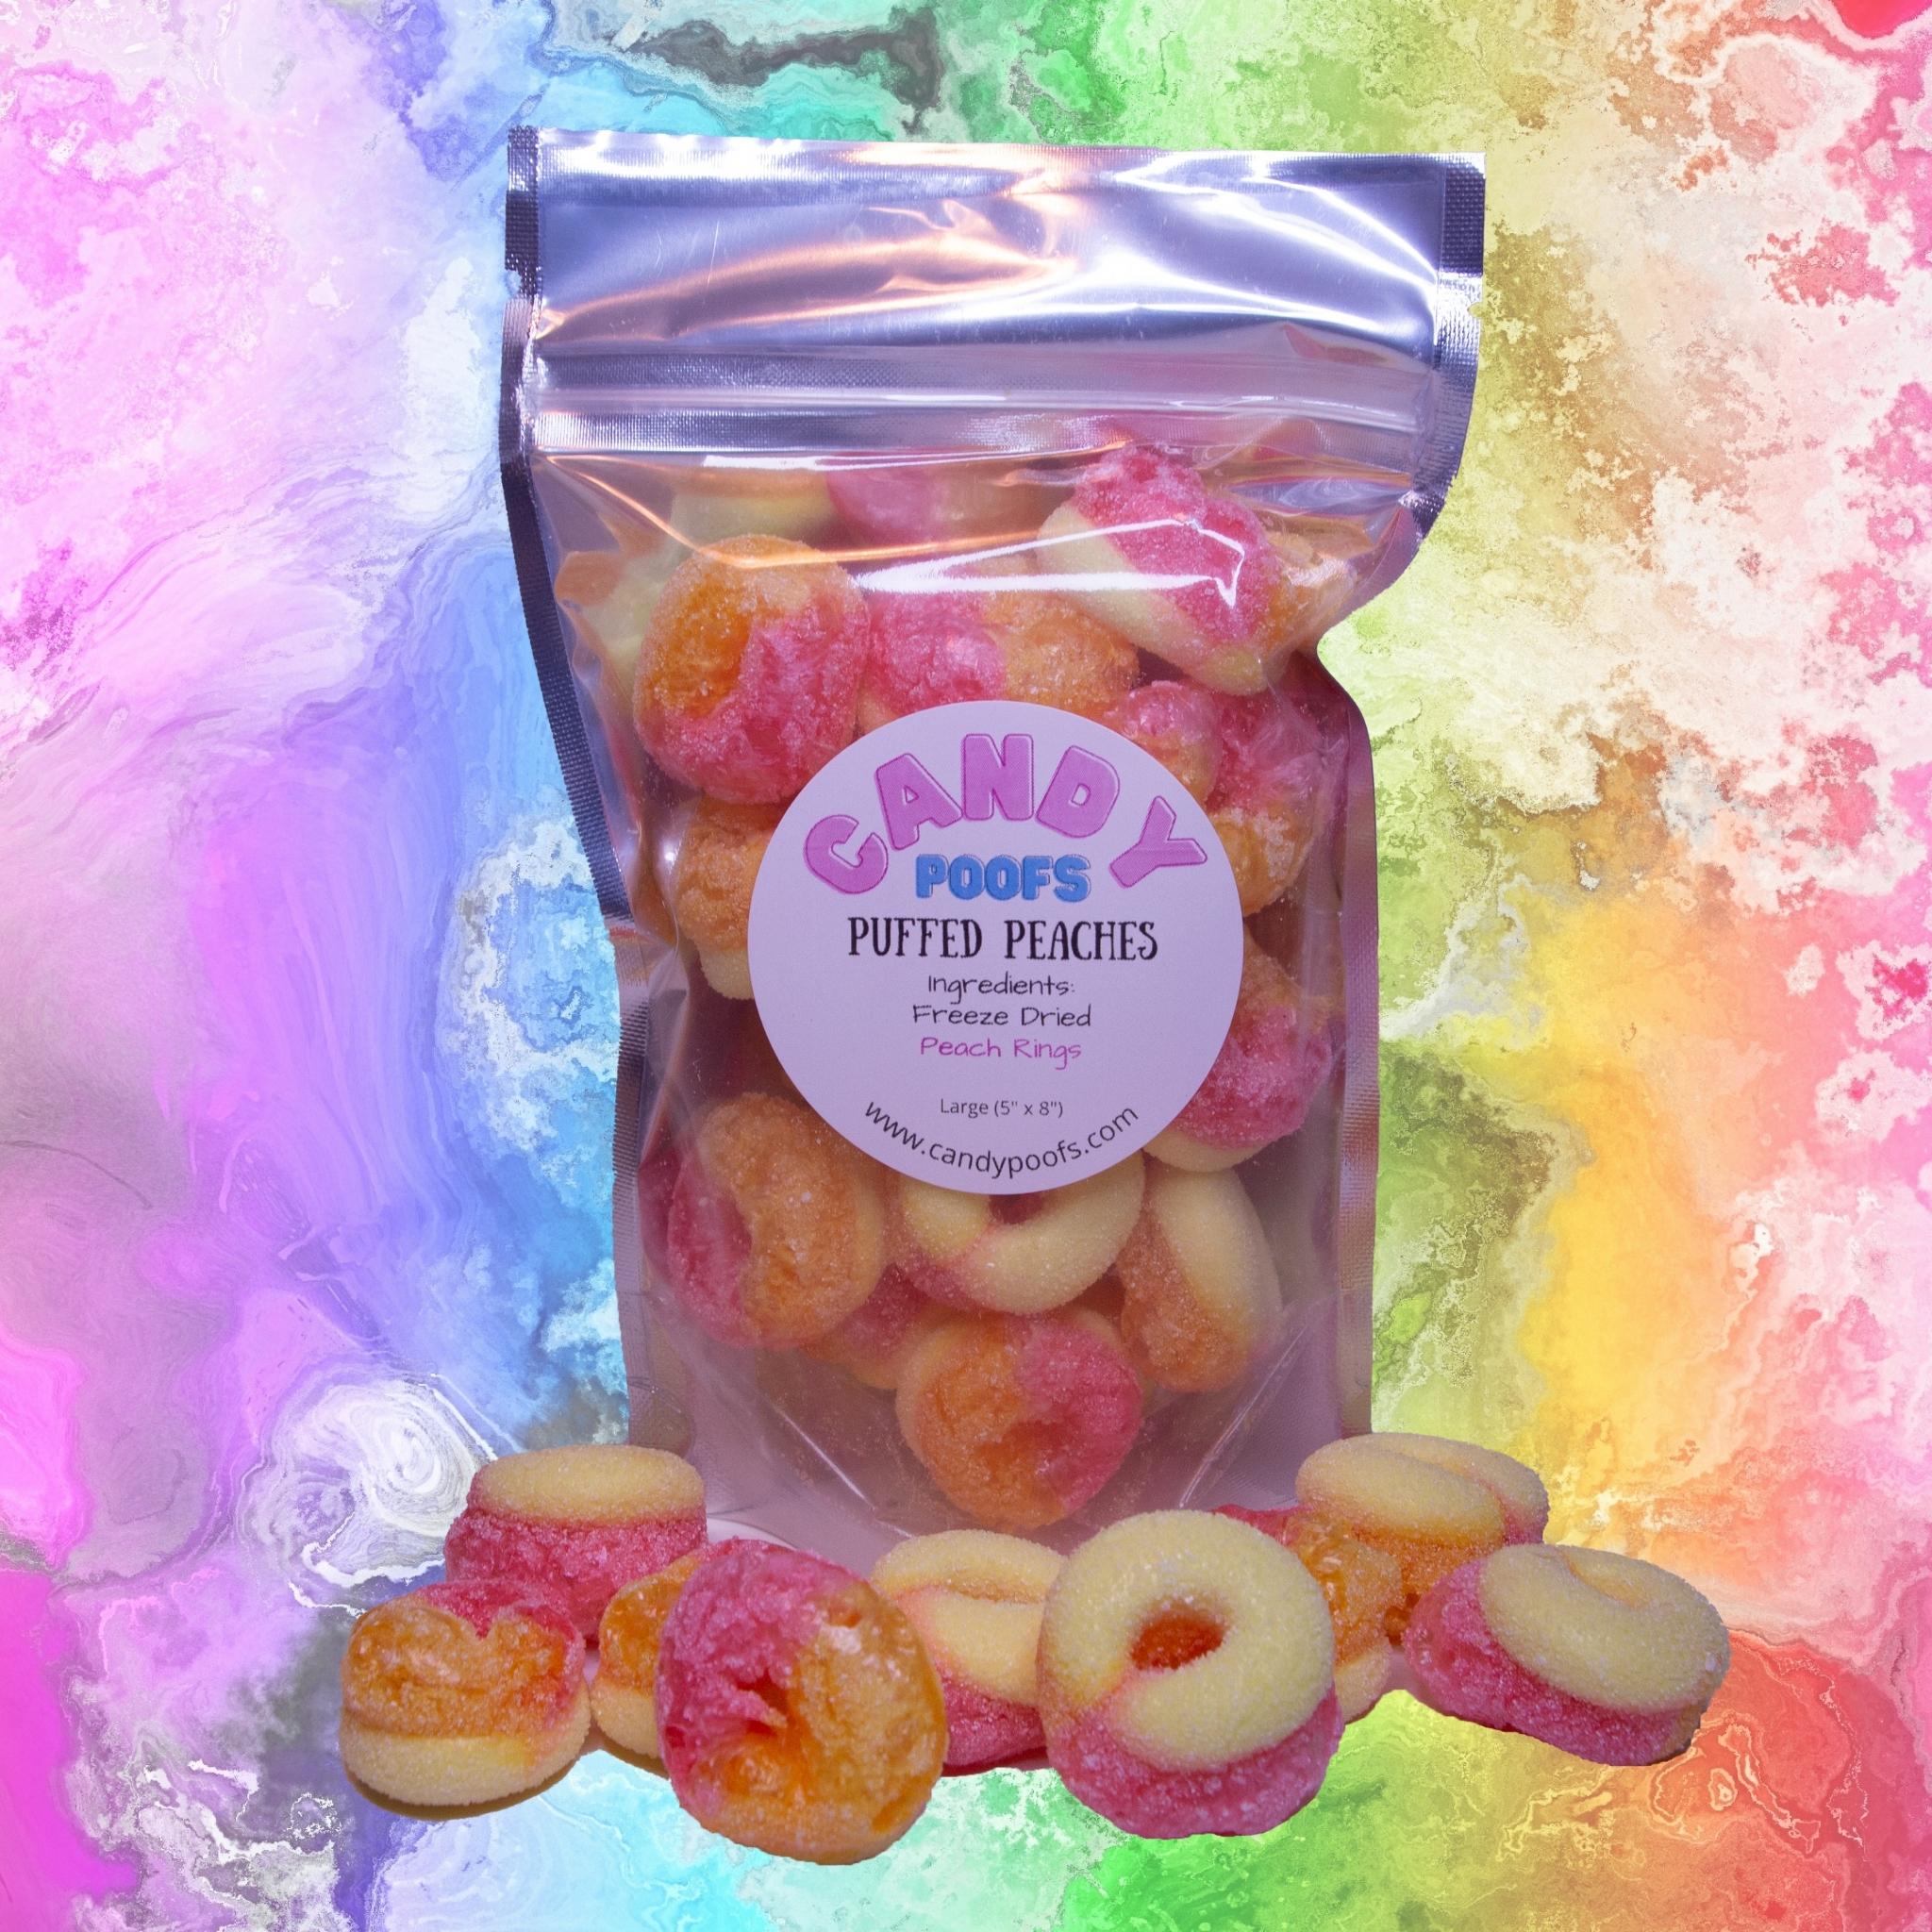 Freeze Dried Peach Rings - 4ct - Blair Candy Company